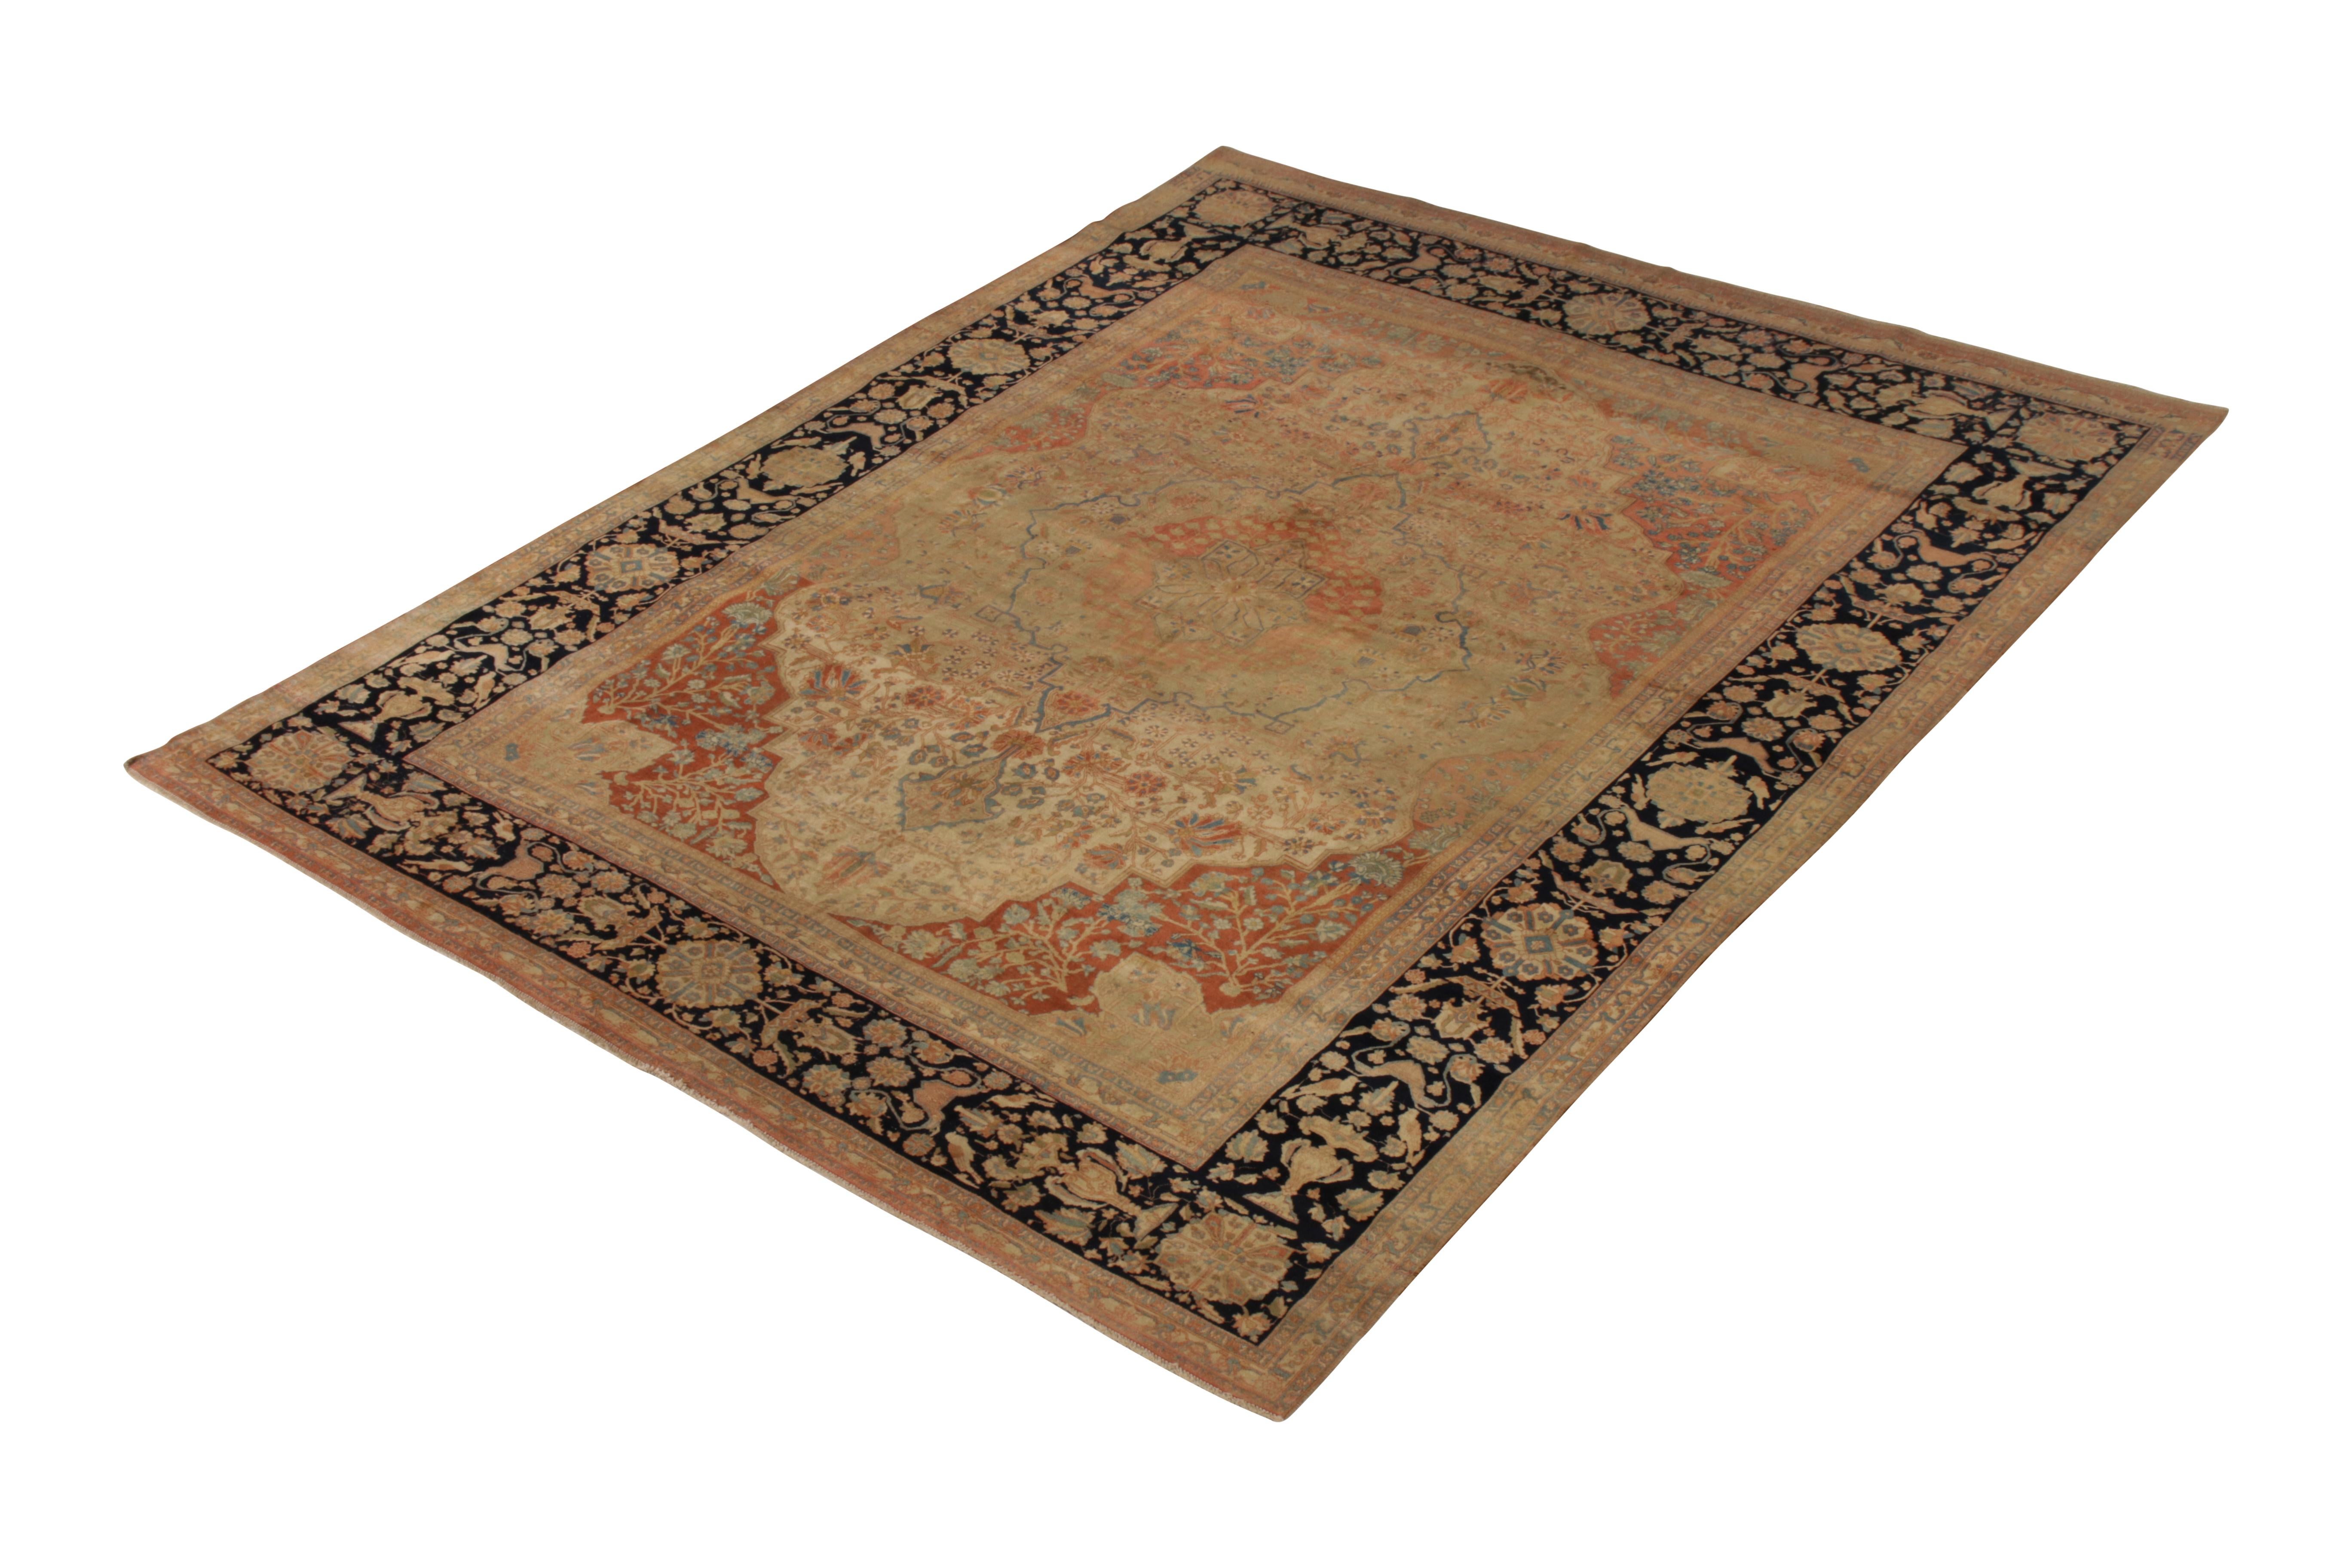 Hand knotted in wool originating circa 1890-1900, this 8 x 10 antique Persian rug connotes a regal Mohtashem rug style—prized among the most venerated classic Persian weavers of the period for distinguished creations like this large-size, regal